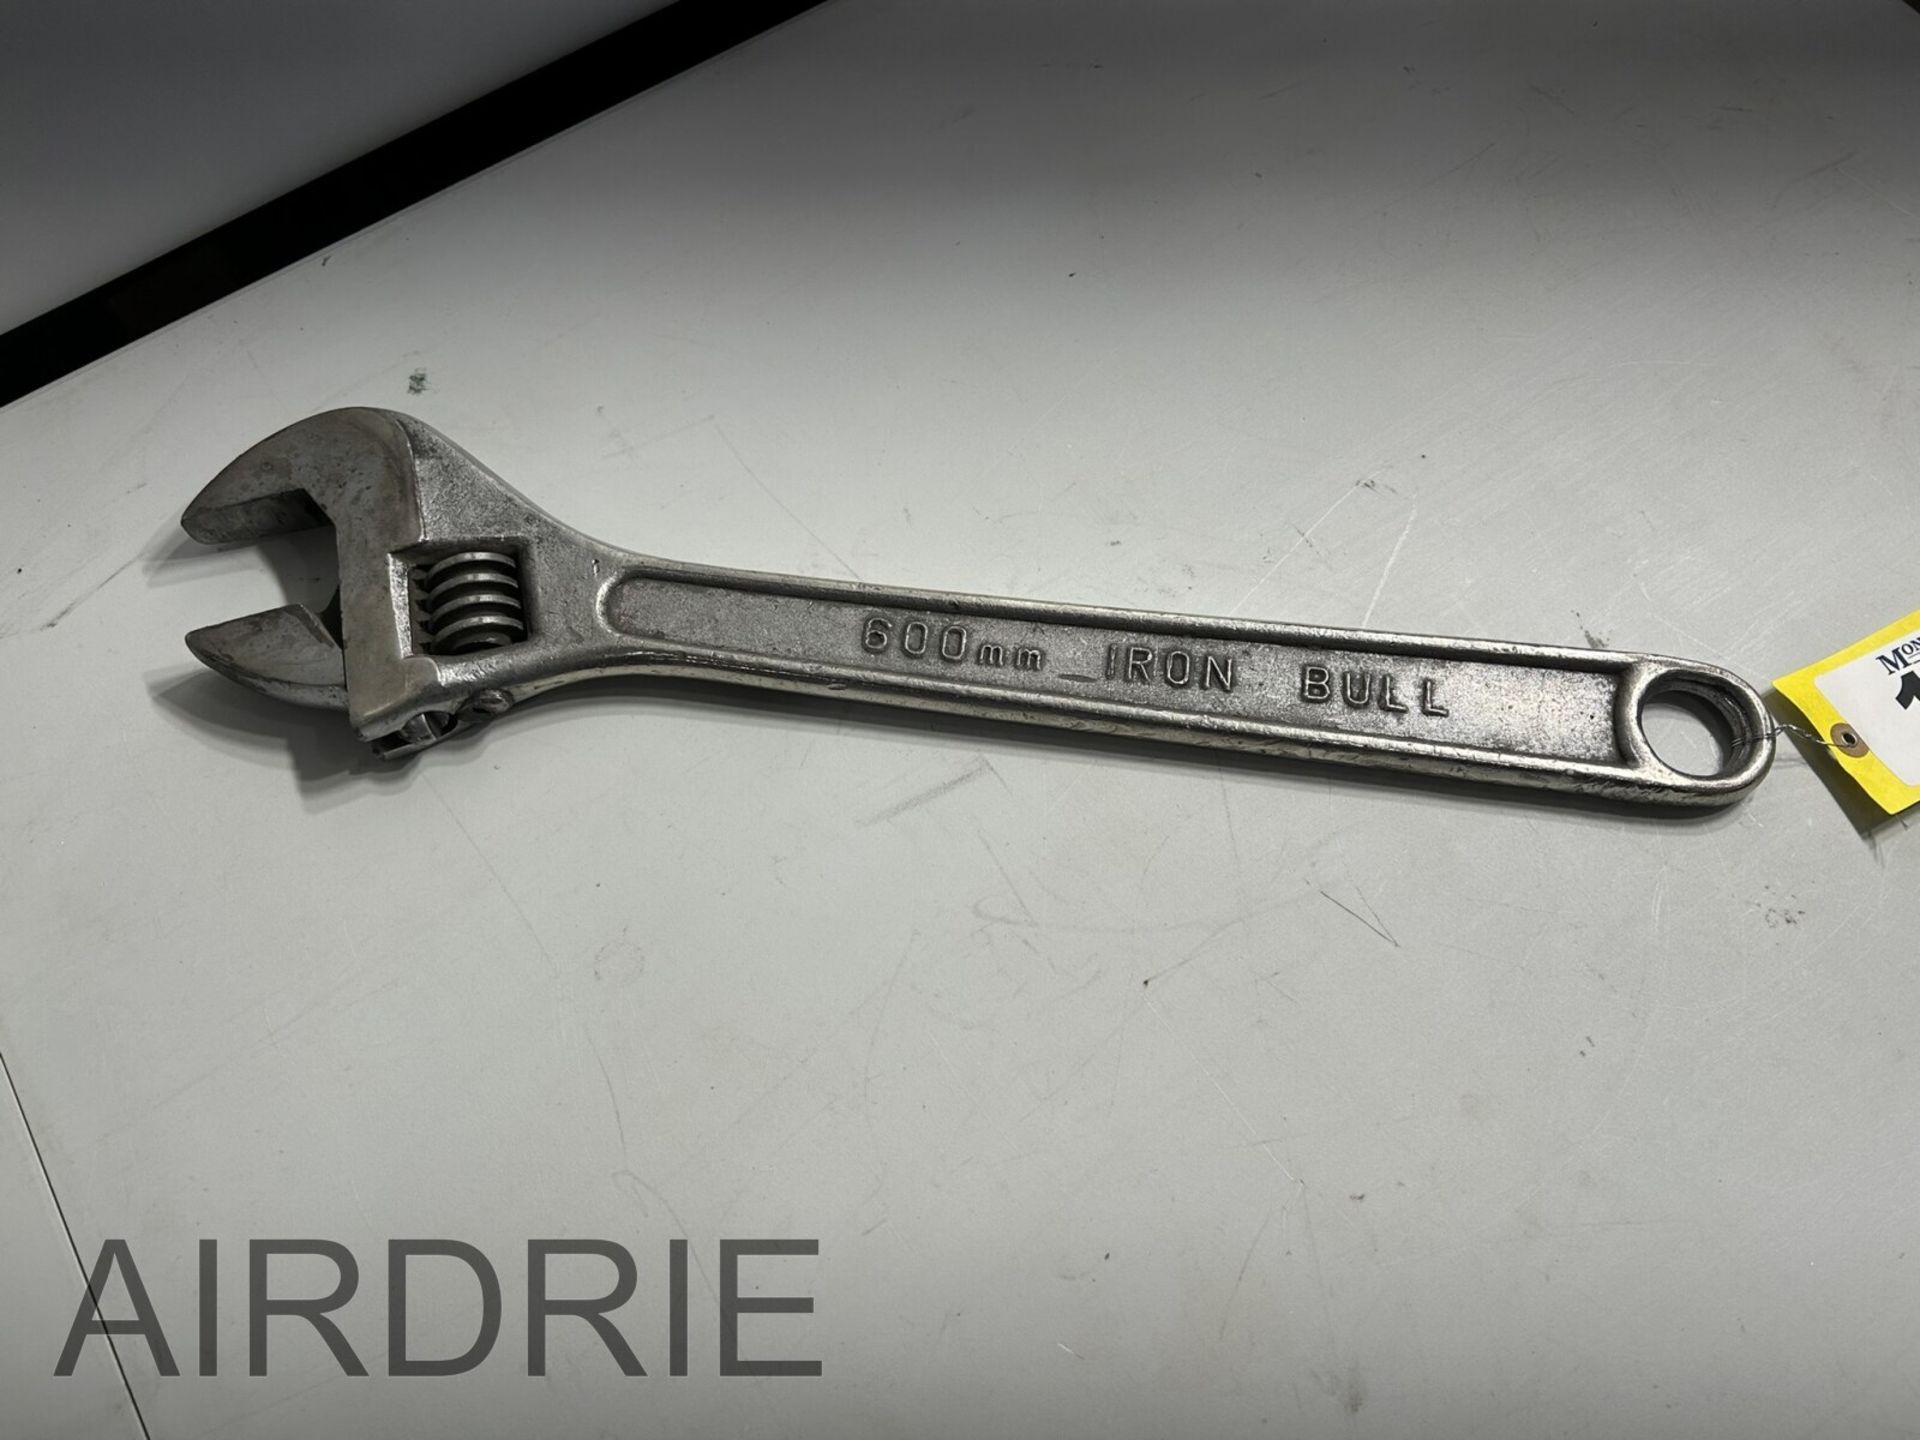 *OFFSITE* IRON BULL 600MM ADJUSTABLE WRENCH